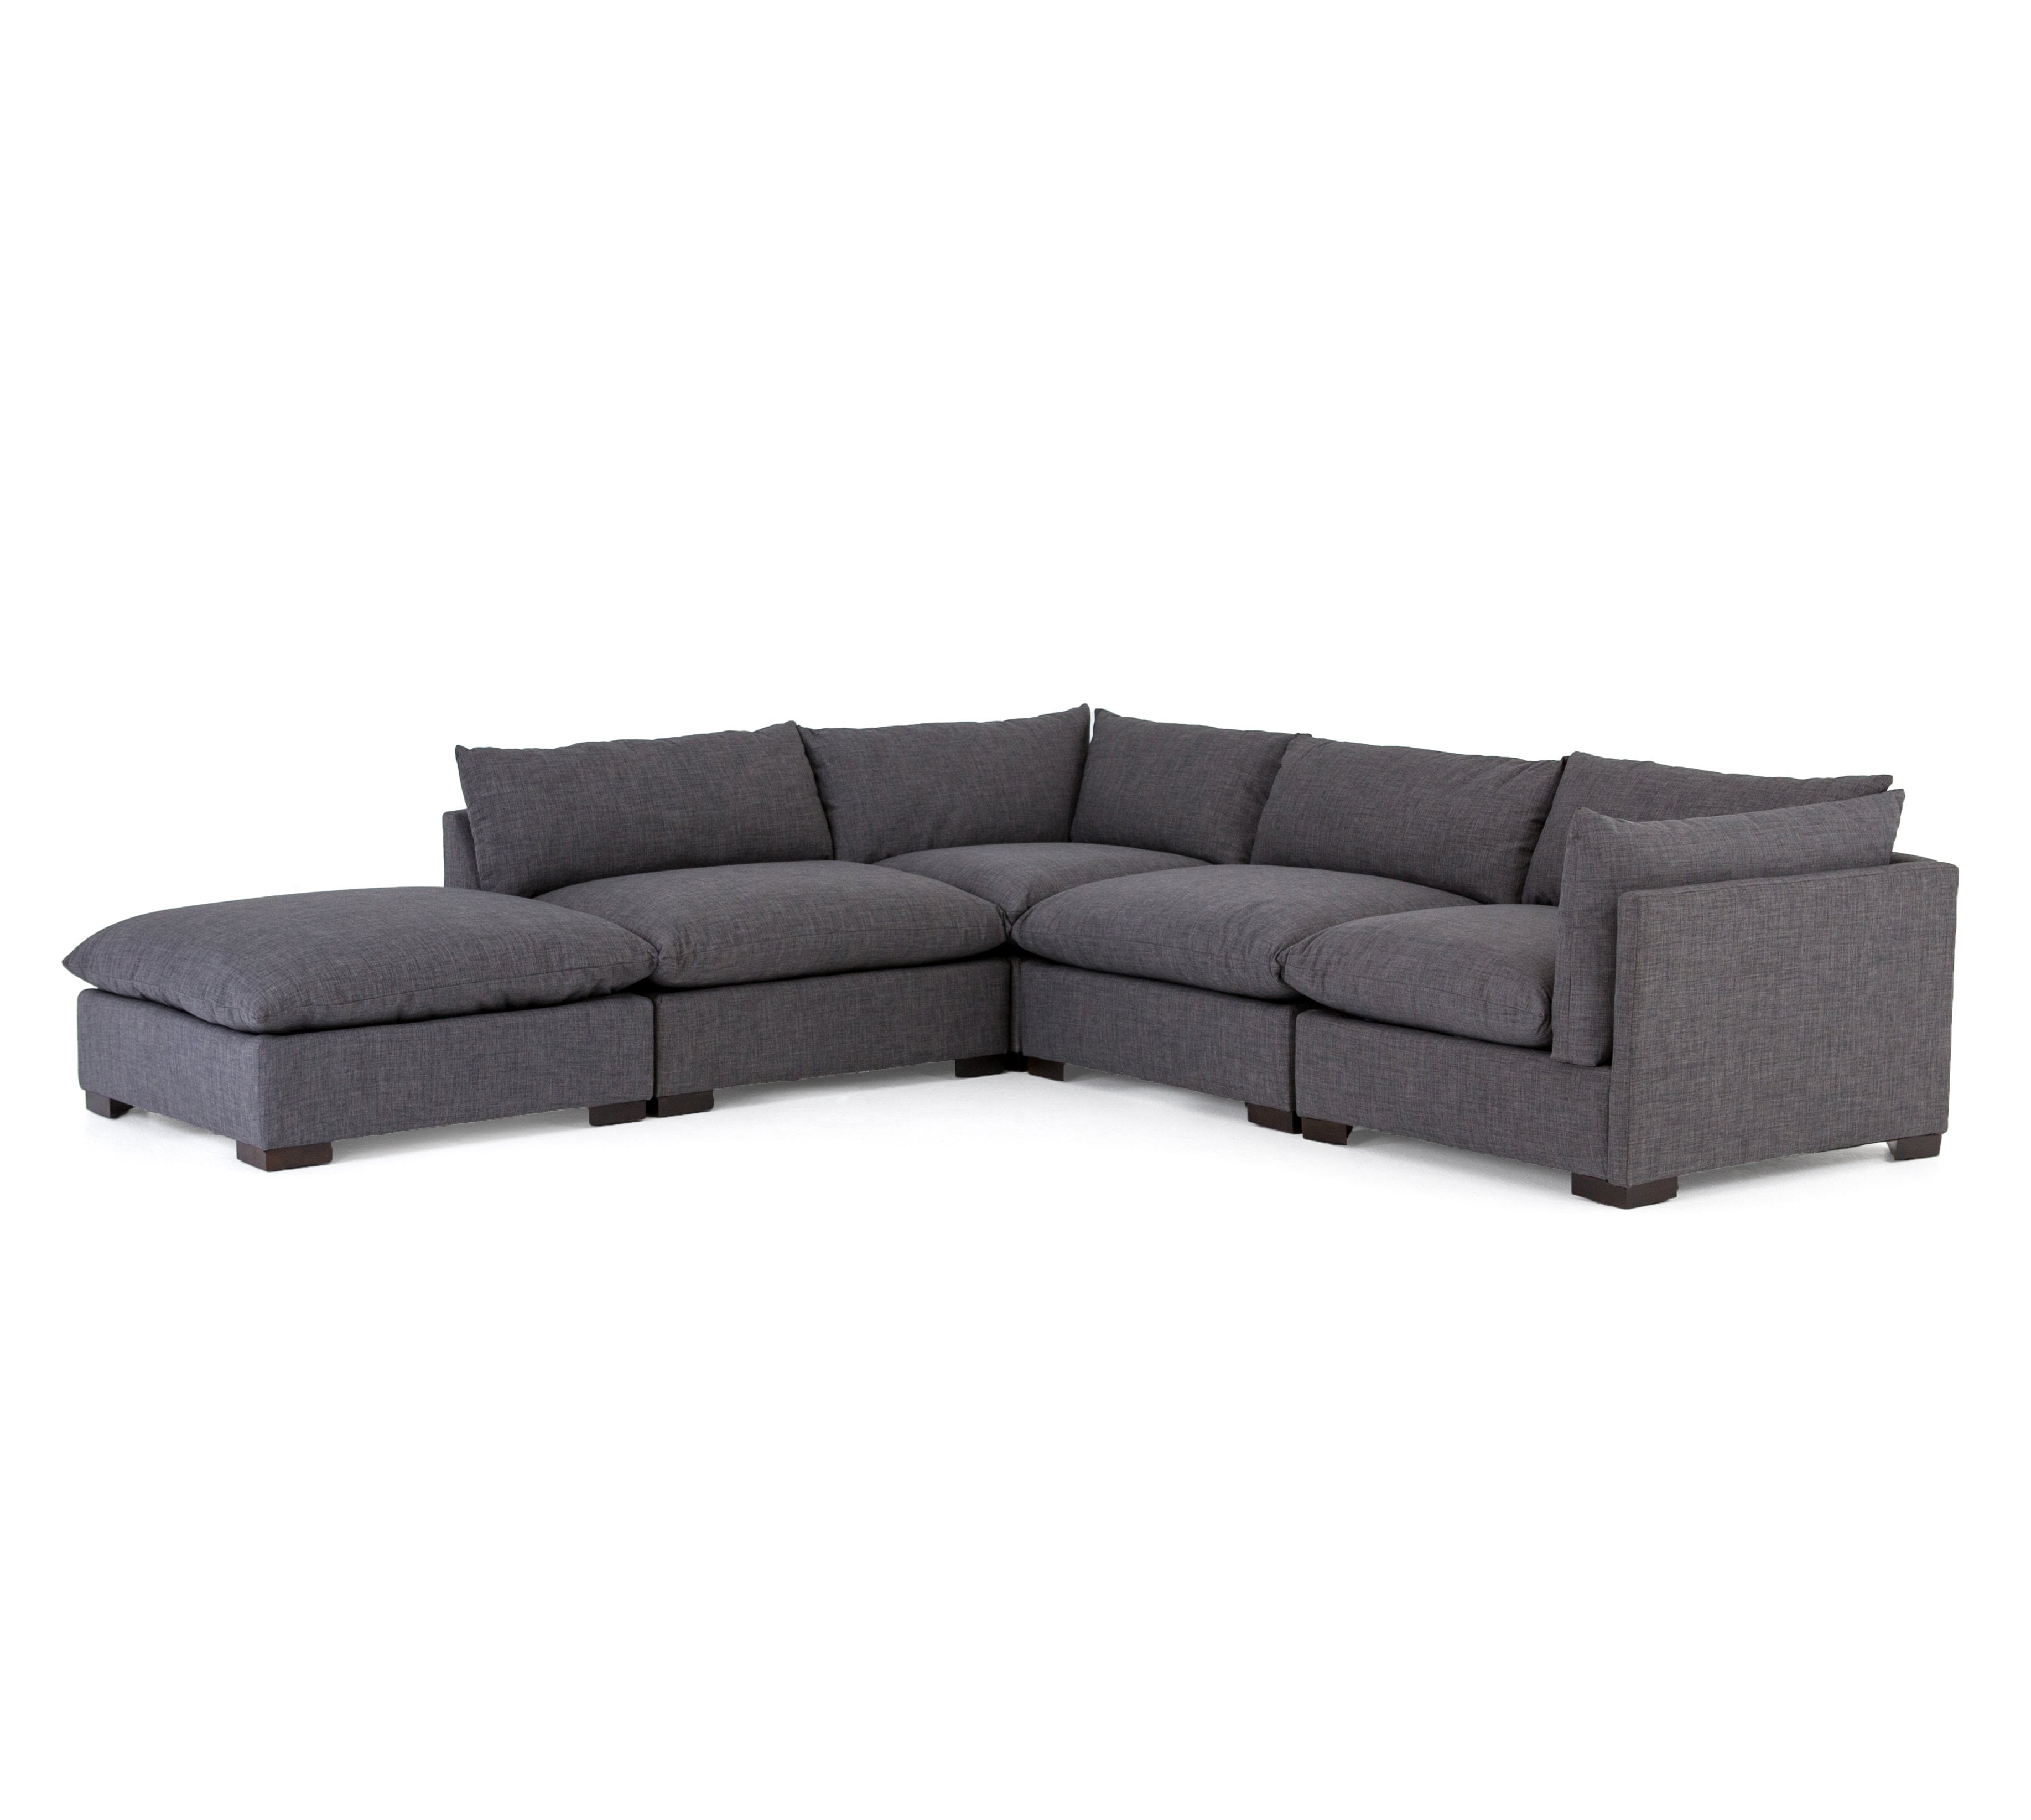 Westwood 4 Pc Sectional W Ottoman in Bennett Charcoal